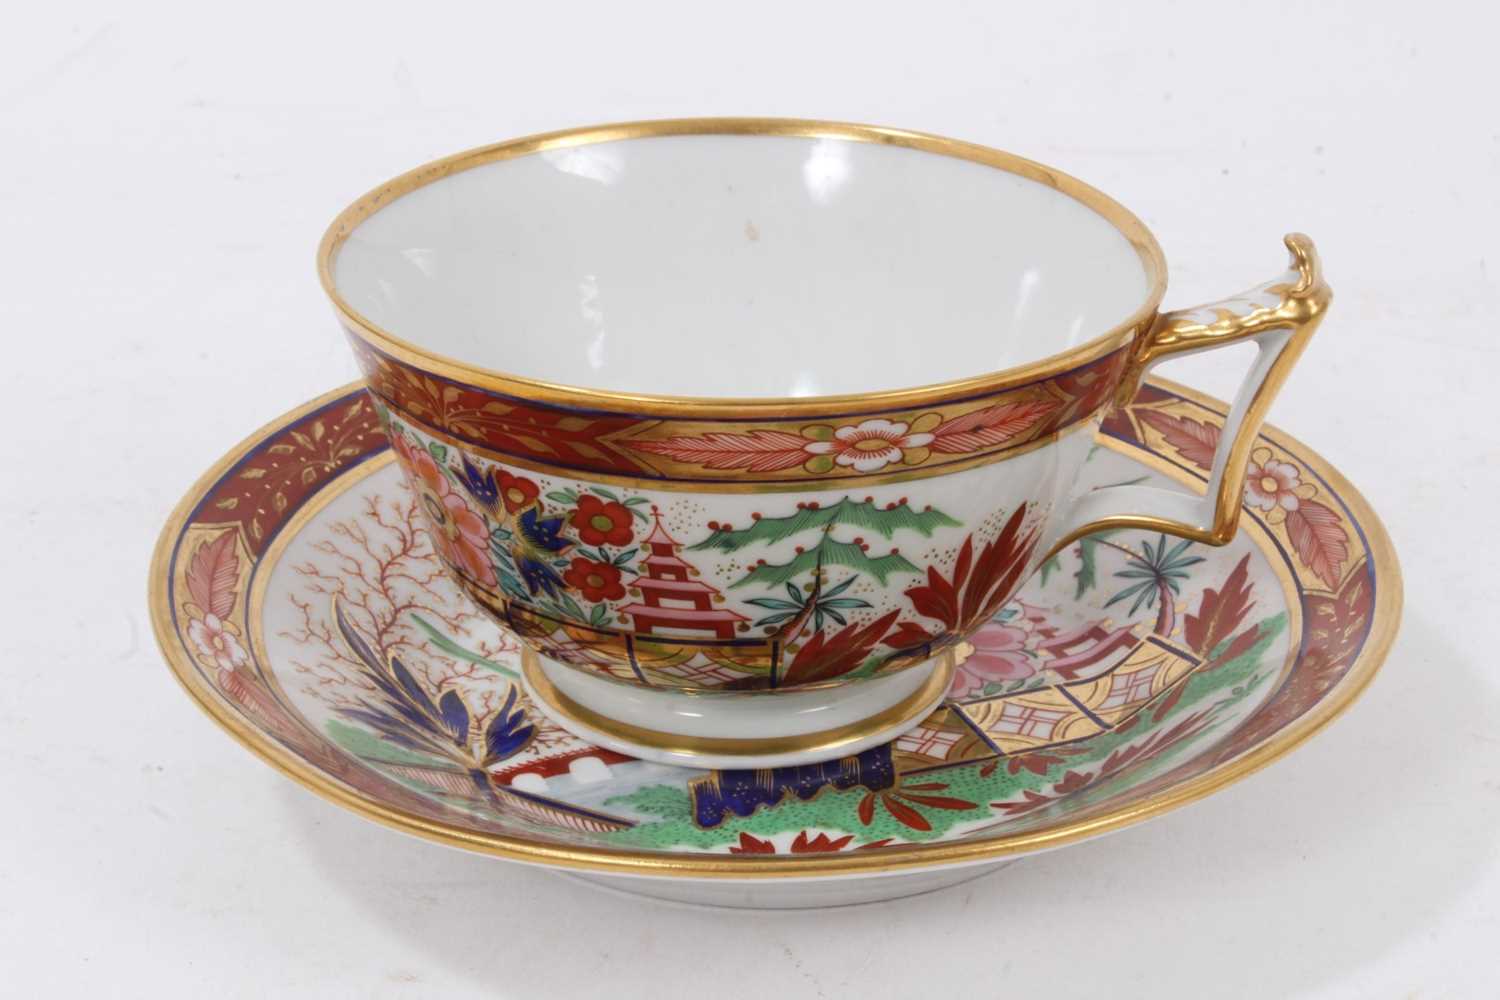 Lot 95 - A Flight, Barr and Barr breakfast cup and saucer, circa 1815